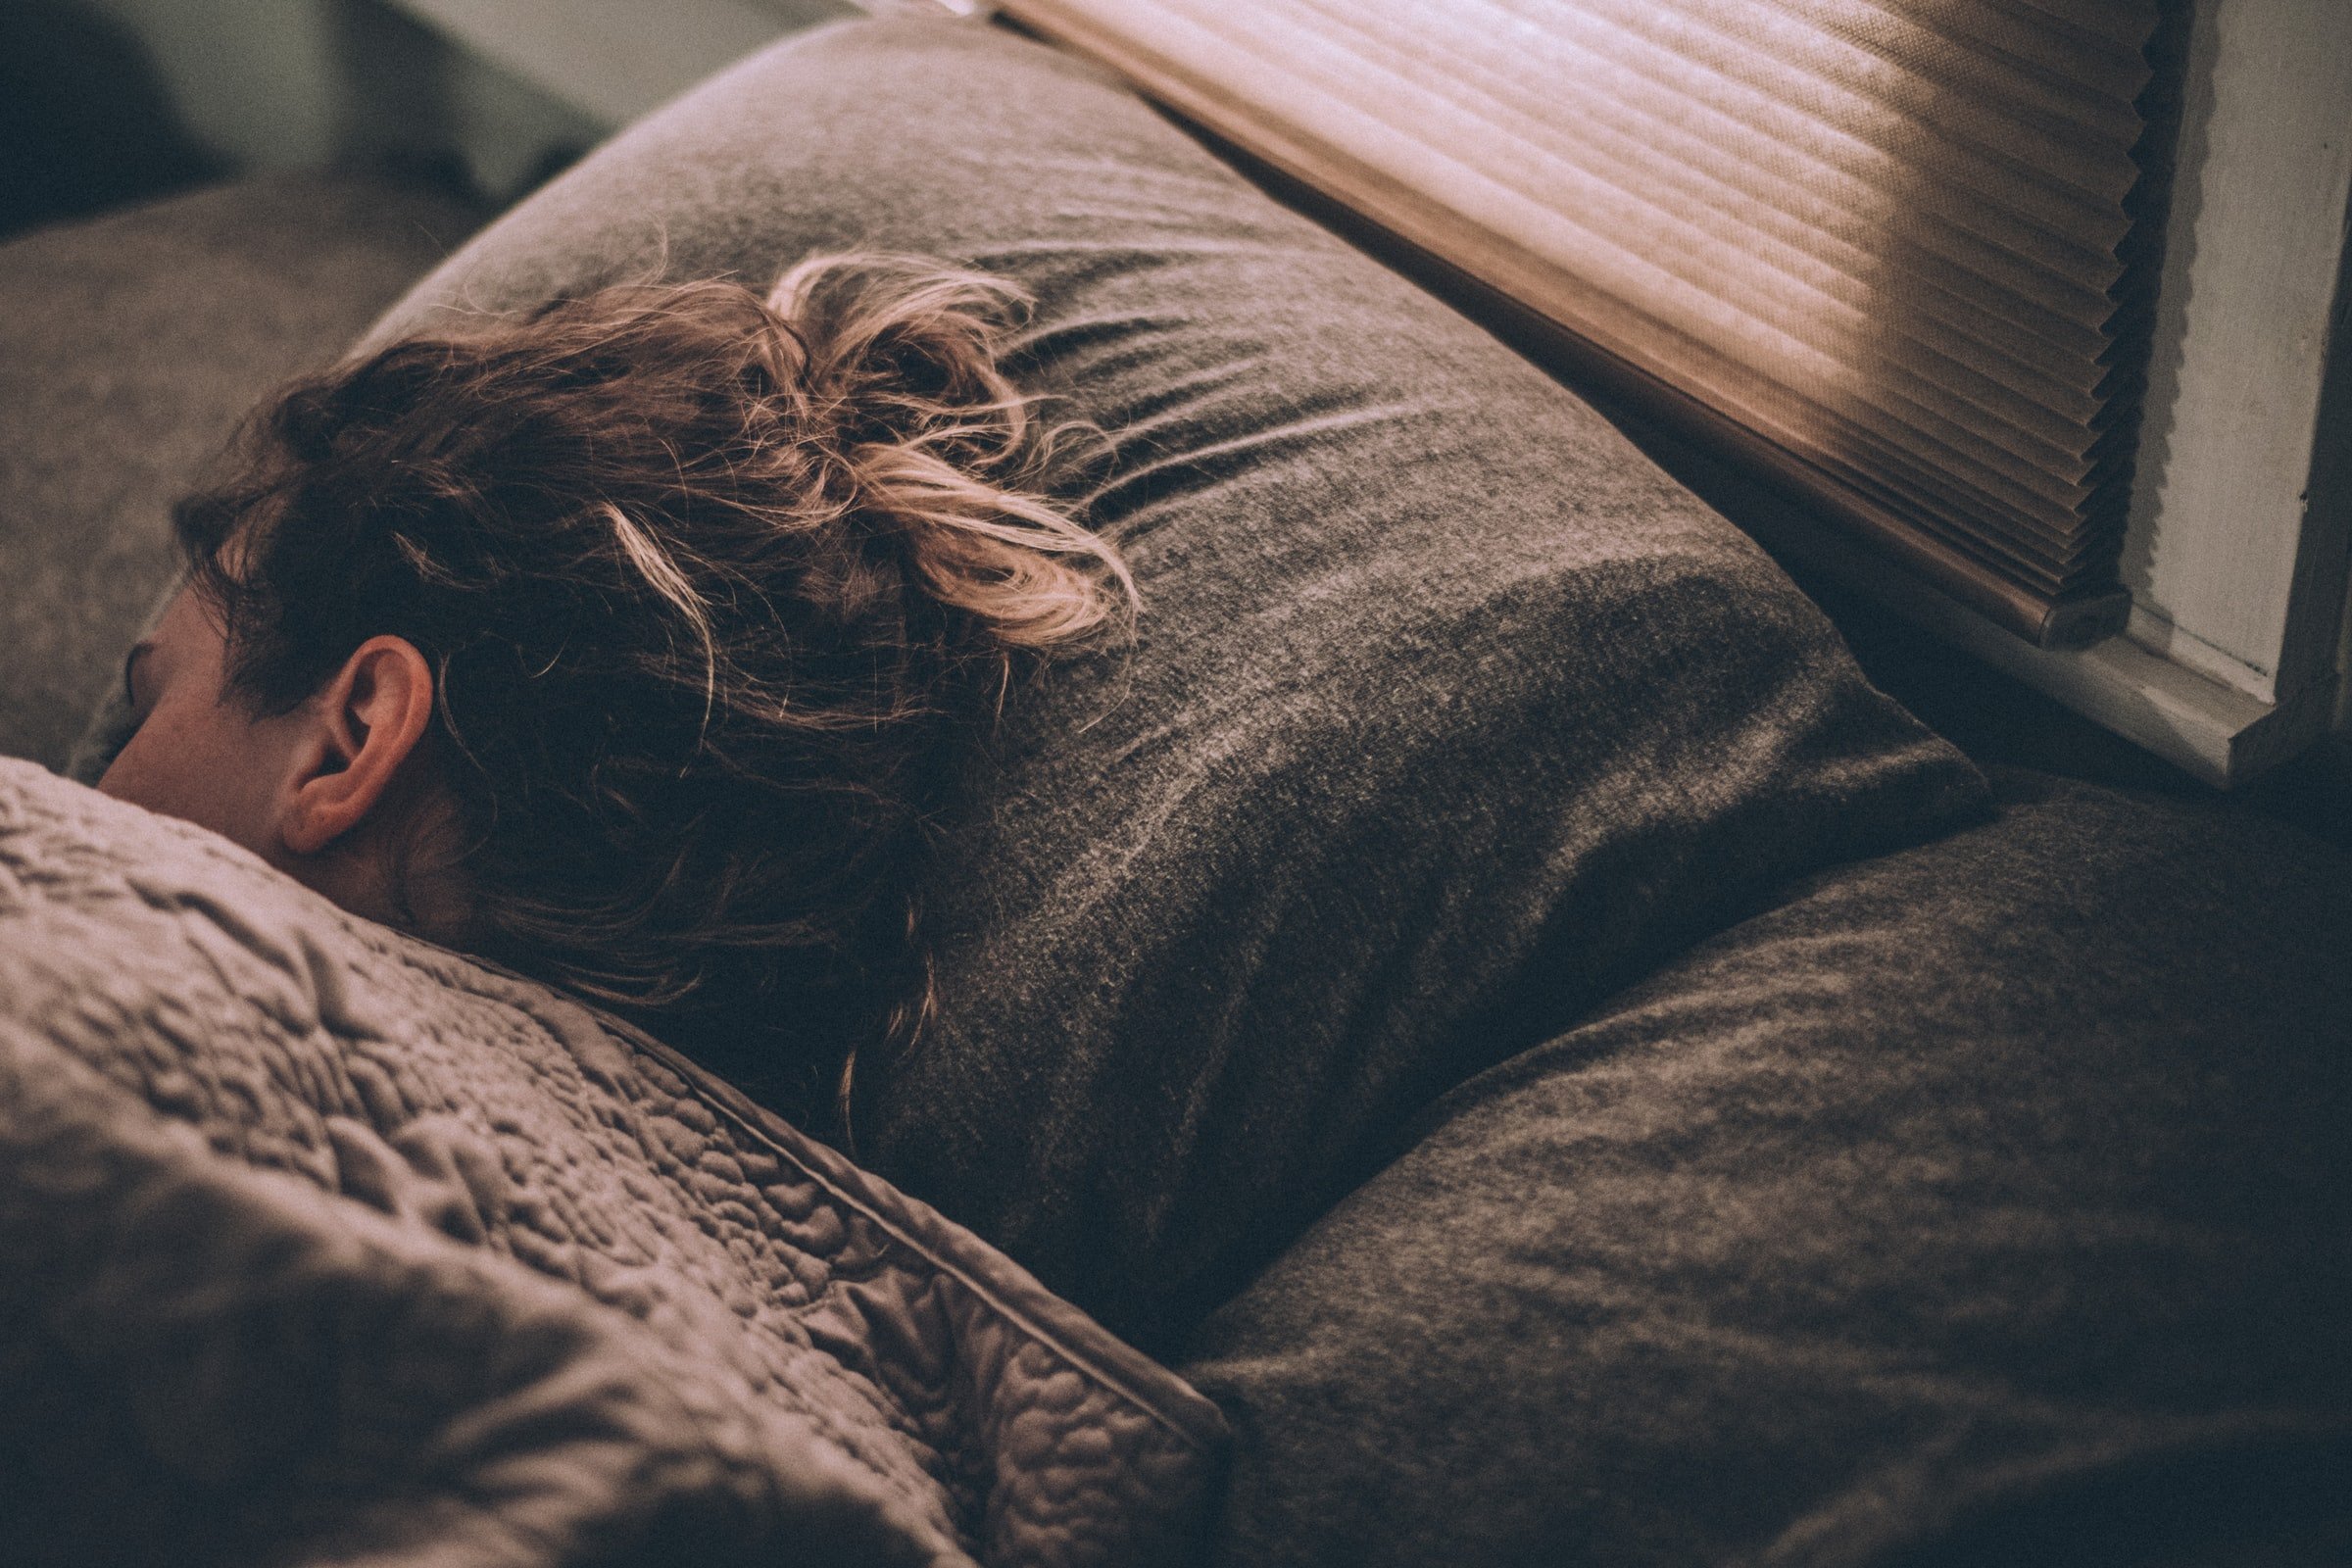 A woman sleeping on the bed. | Source: Unsplash